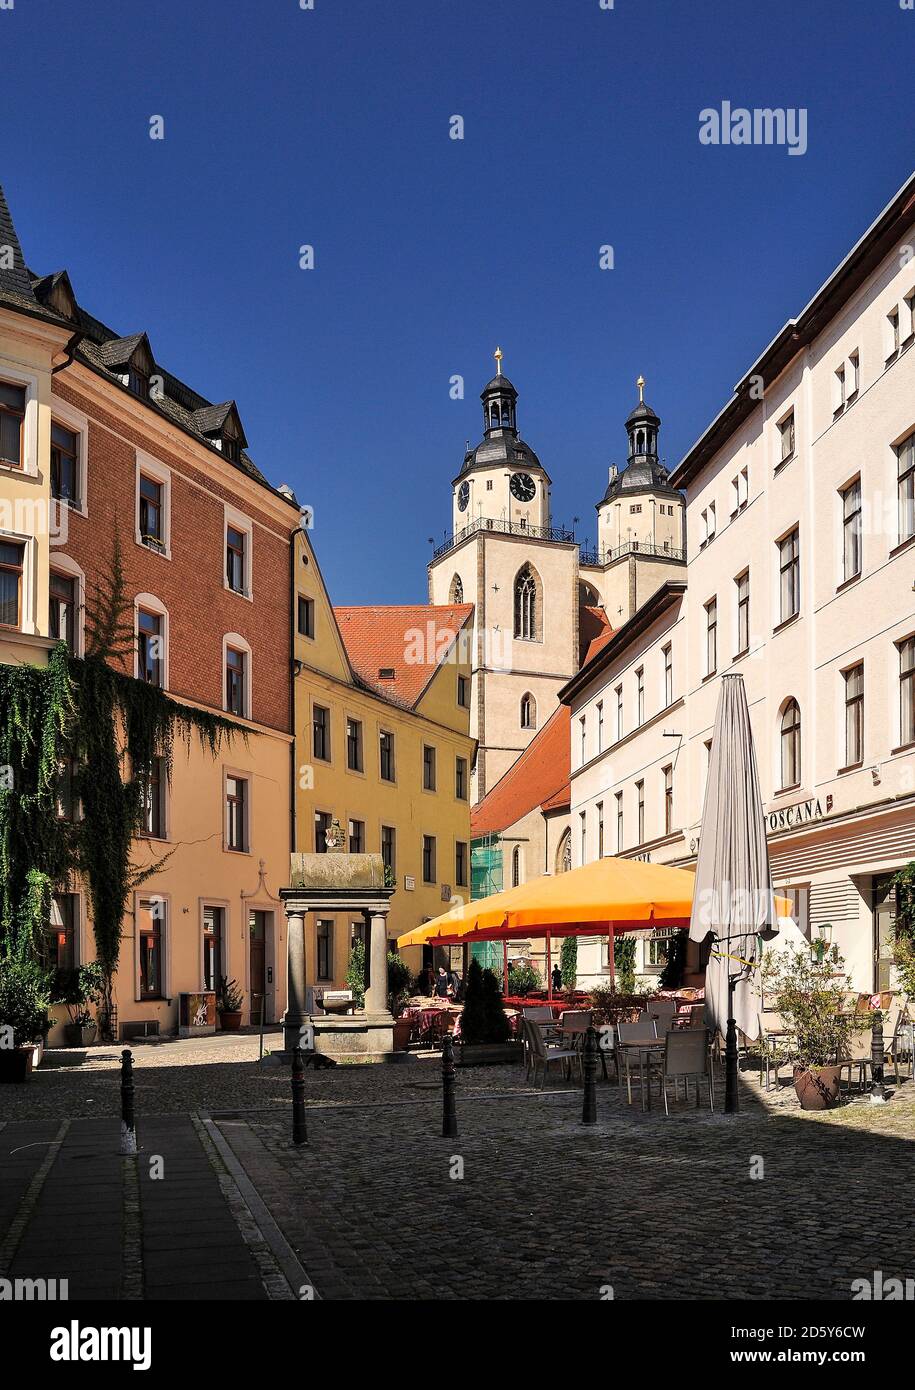 Germany, Lutherstadt Wittenberg, view to sidewalk cafe, houses and St Mary's Church in the background Stock Photo